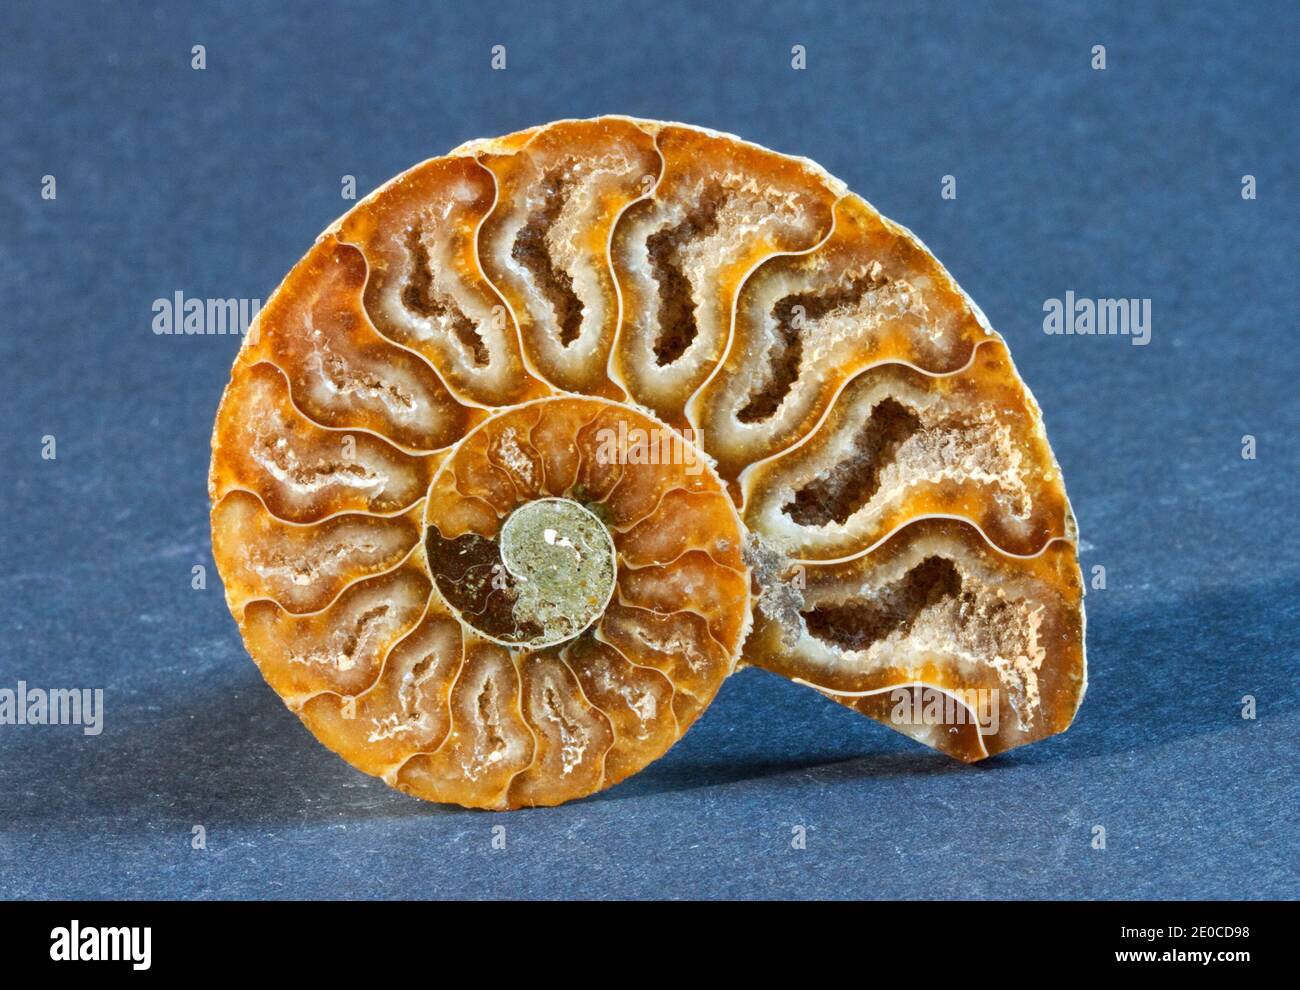 The septa, or gas filled chambers that controlled the buoyancy of this extinct Ammonite during it's life 100 million years ago Stock Photo